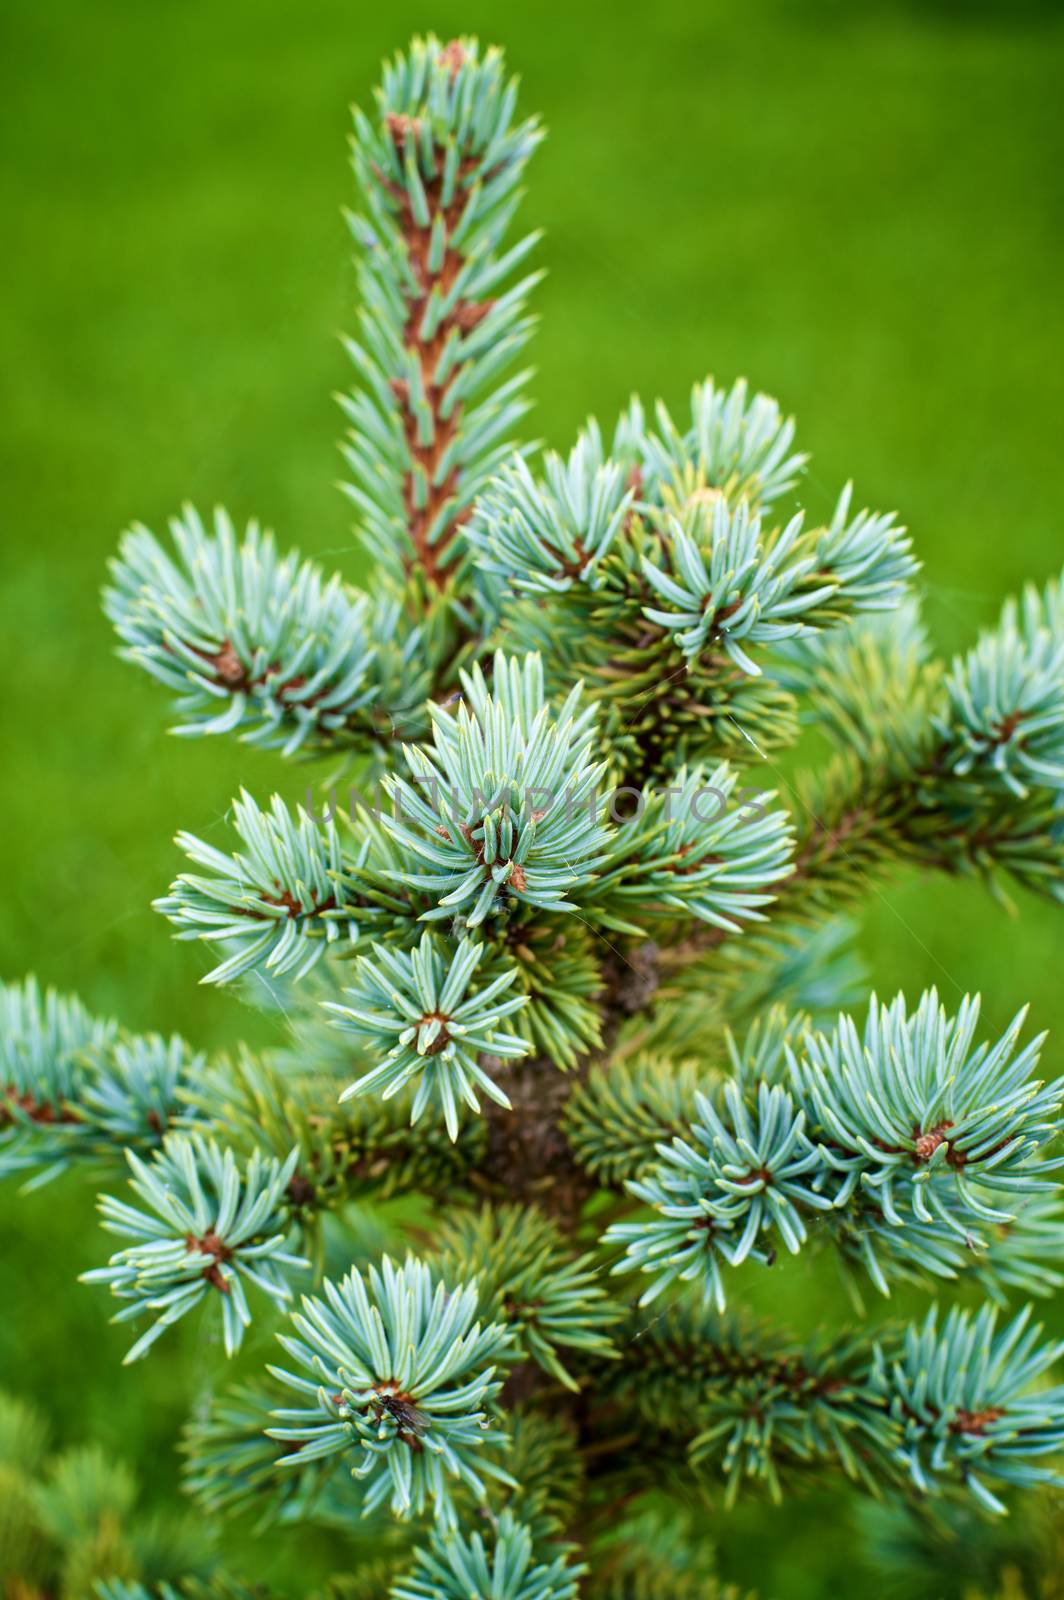 Young Spruce Shoots by zhekos